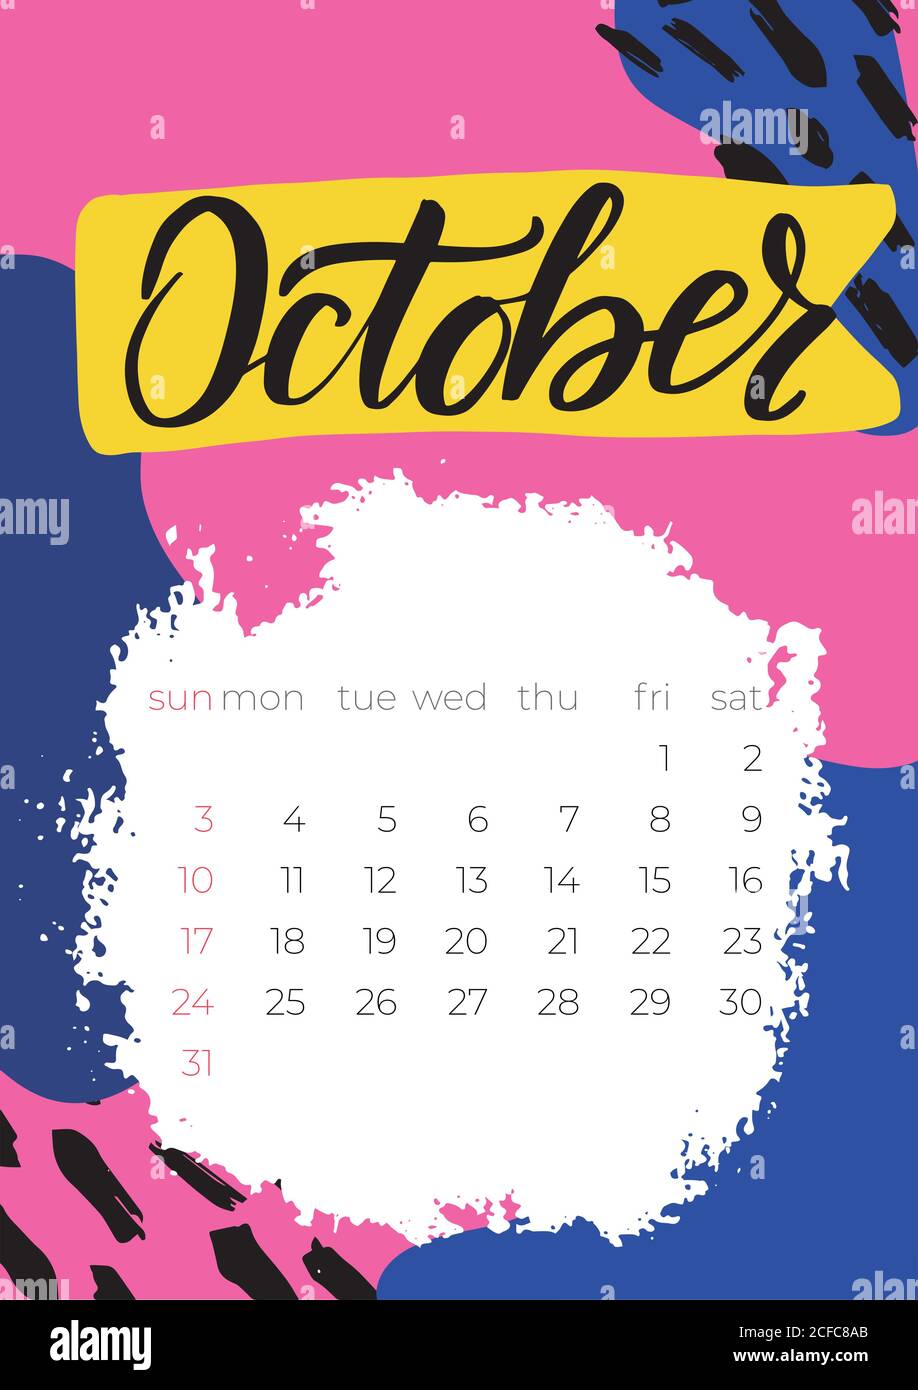 Calendar October 2021 planner with abstract vector graphic Stock Vector